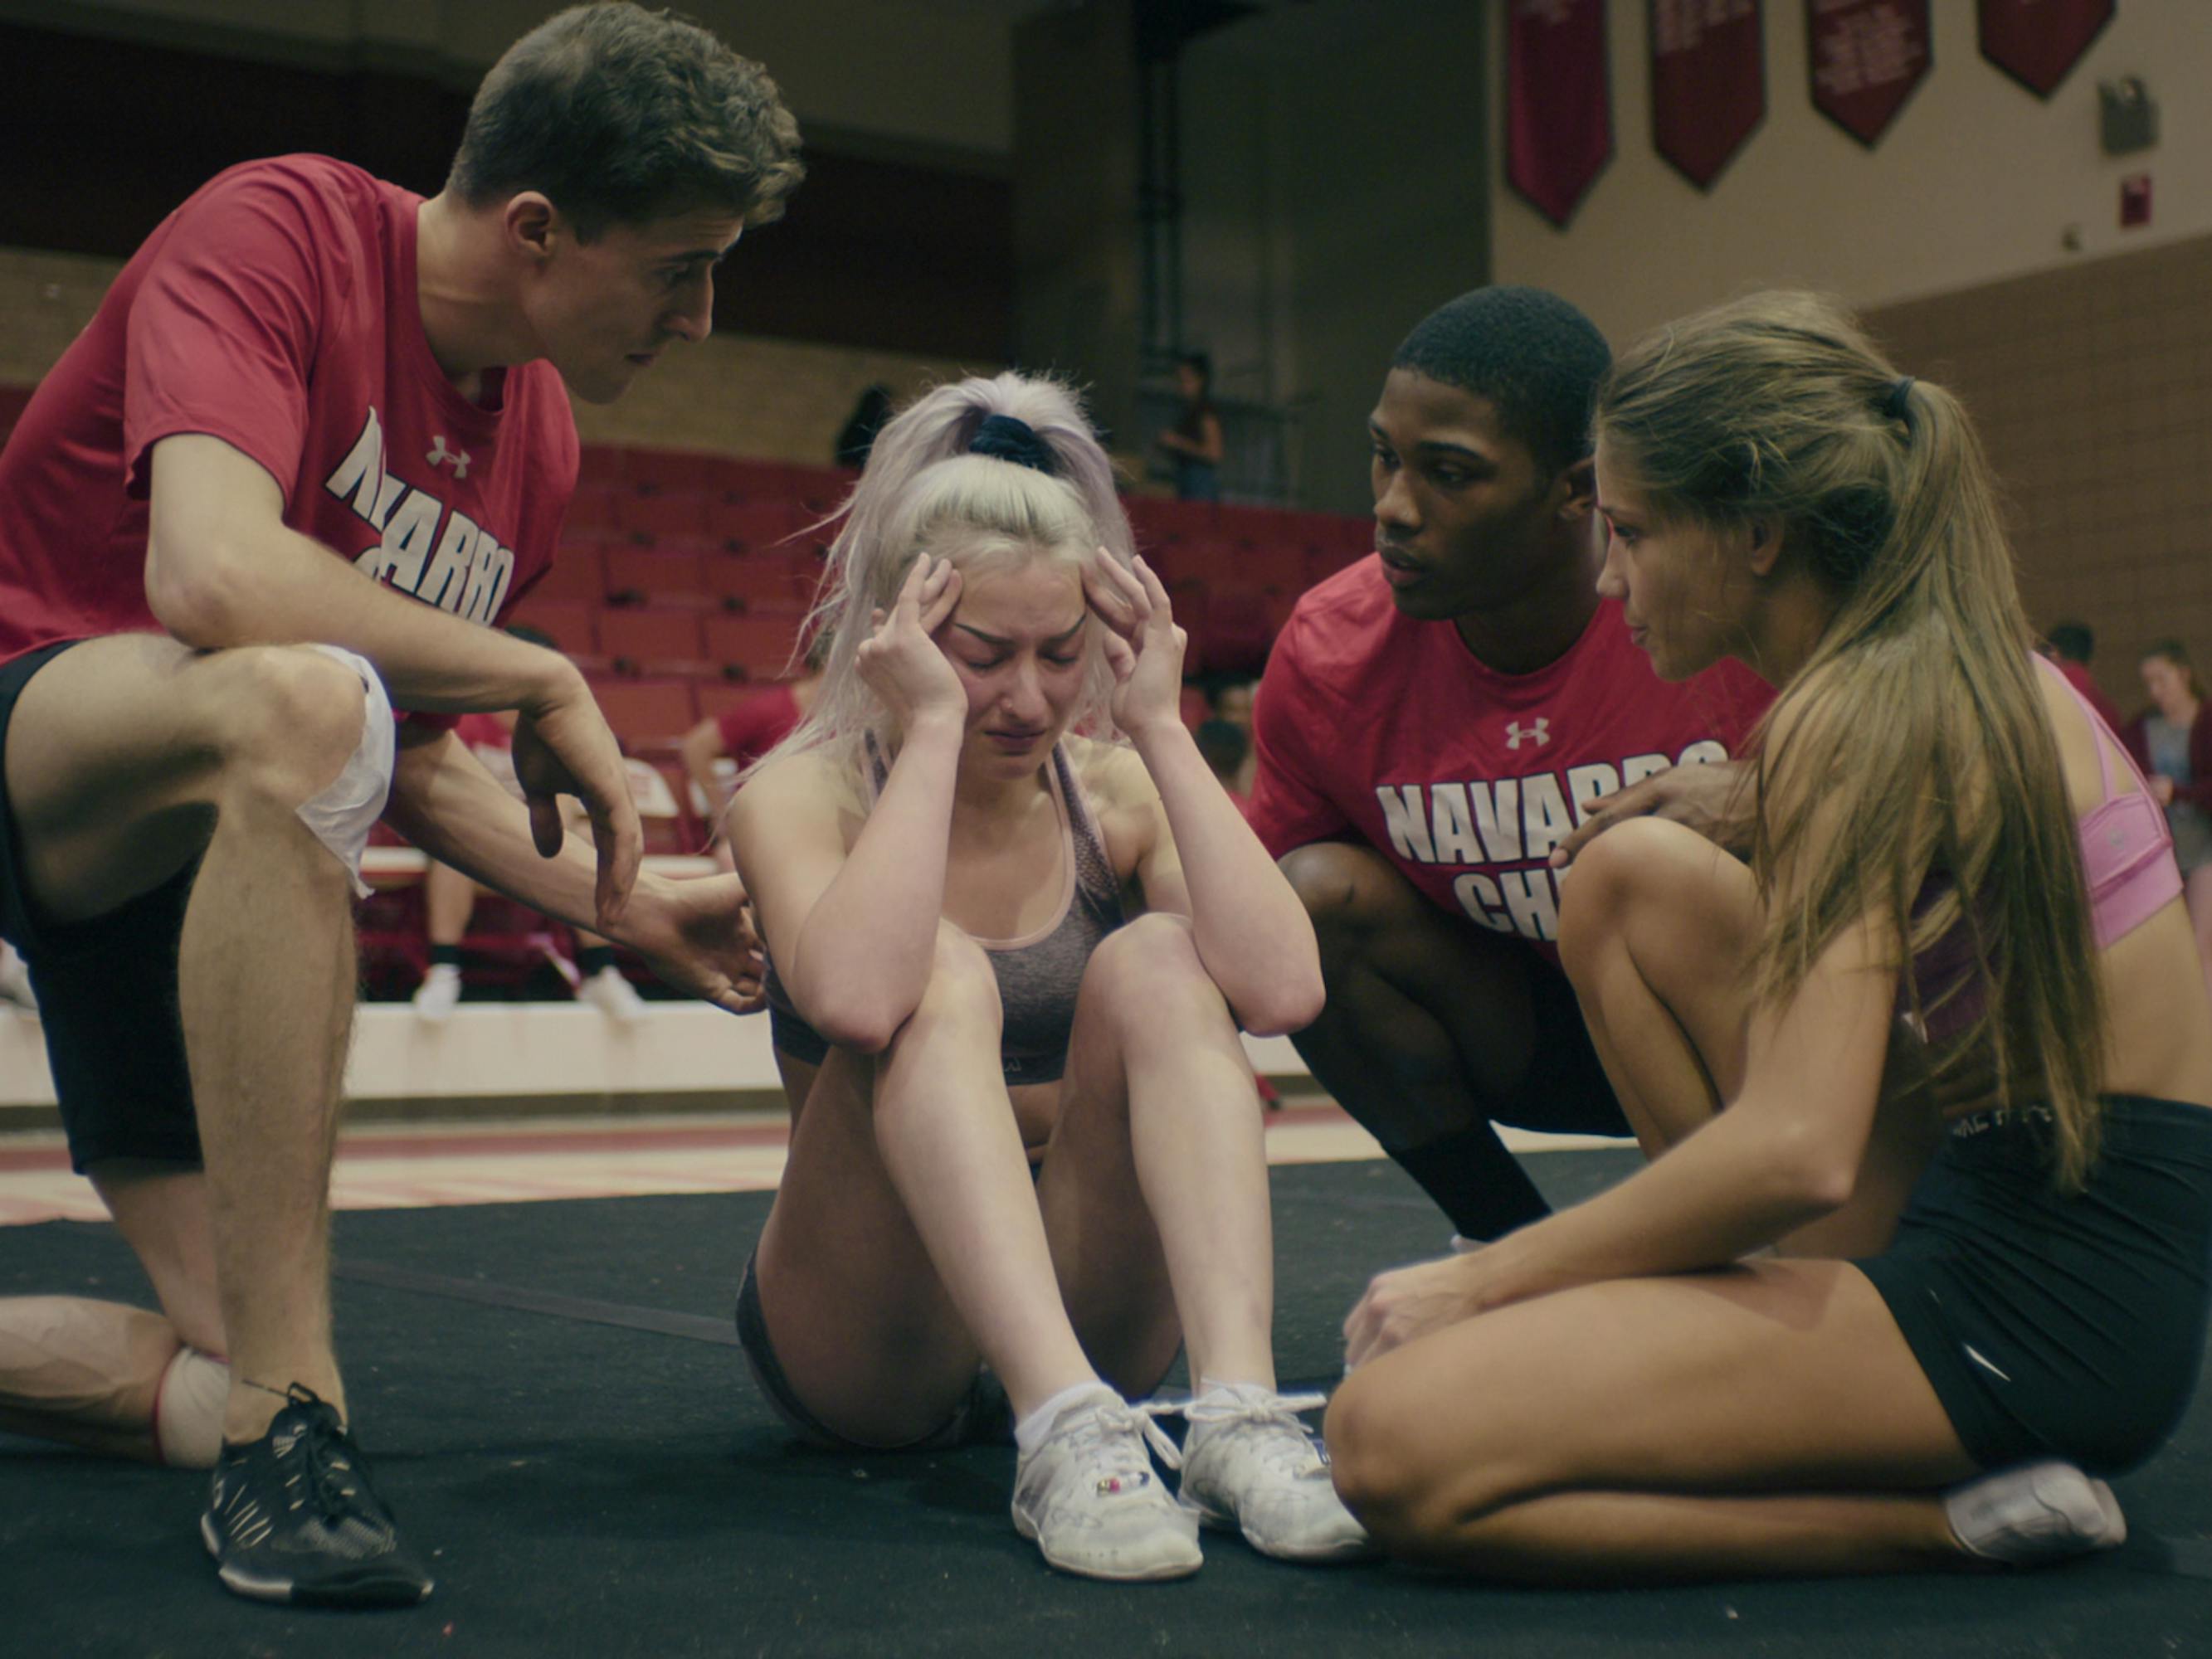 Dillon Brandt, Lexi Brumback, La'Darius Marshall and Morgan Simianer huddle together on a black mat. Lexi looks upset and the other three comfort her. The two men wear red shirts and black shorts. Lexi wears white sneakers and a grey sports bra, and Morgan wears black shorts and a pink sports bra.